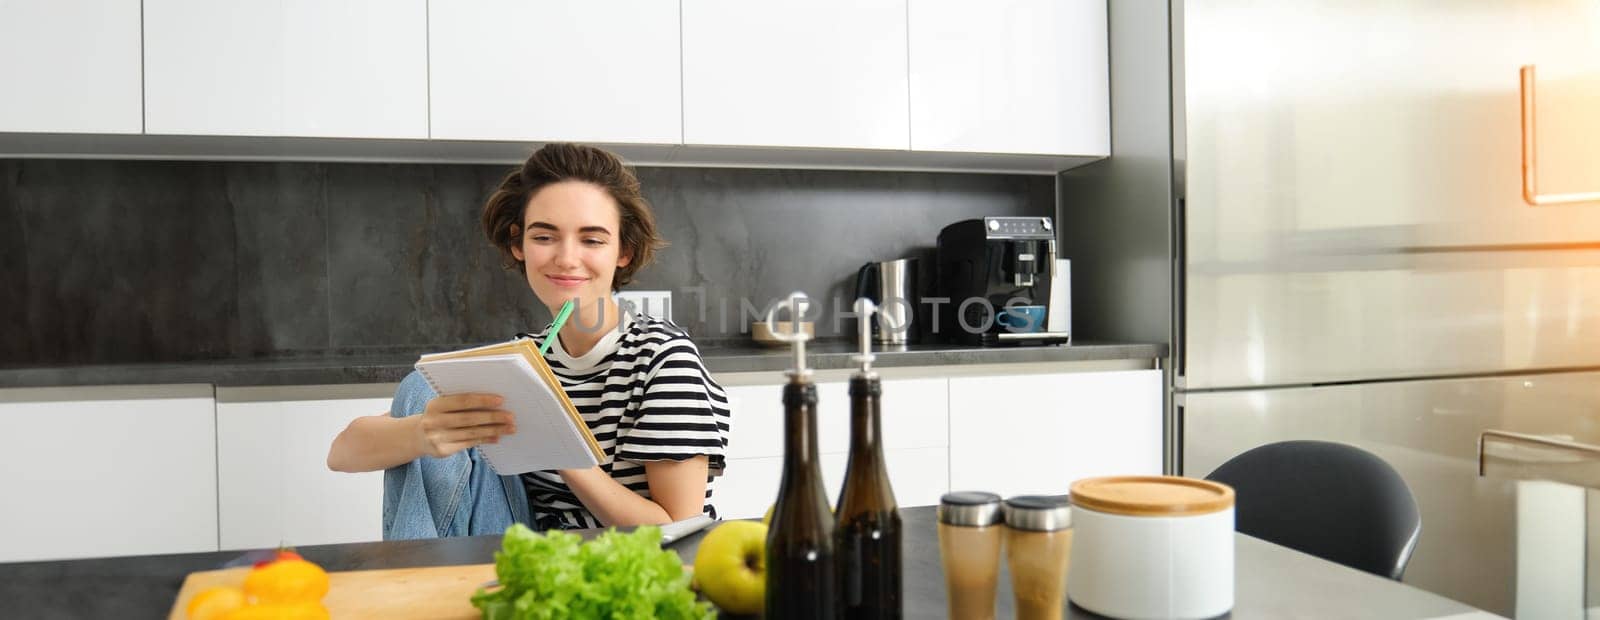 Portrait of young woman looking at cooking ingredients on kitchen counter and making notes, writing down recipes, thinking of meal for dinner, preparing vegetarian food.